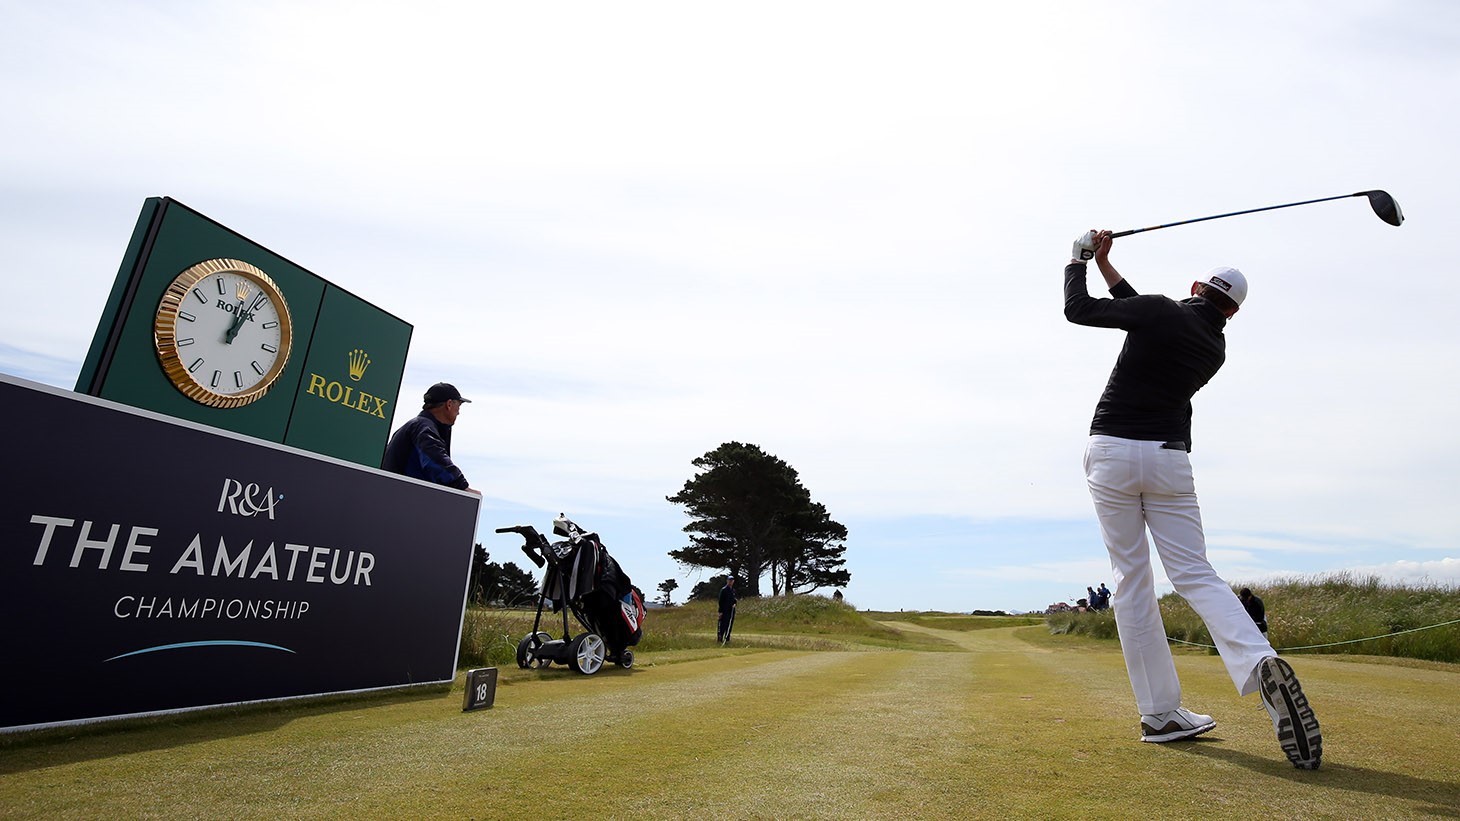 An amateur competitor tees off during the R&A Amateur Championship at Portmarnock